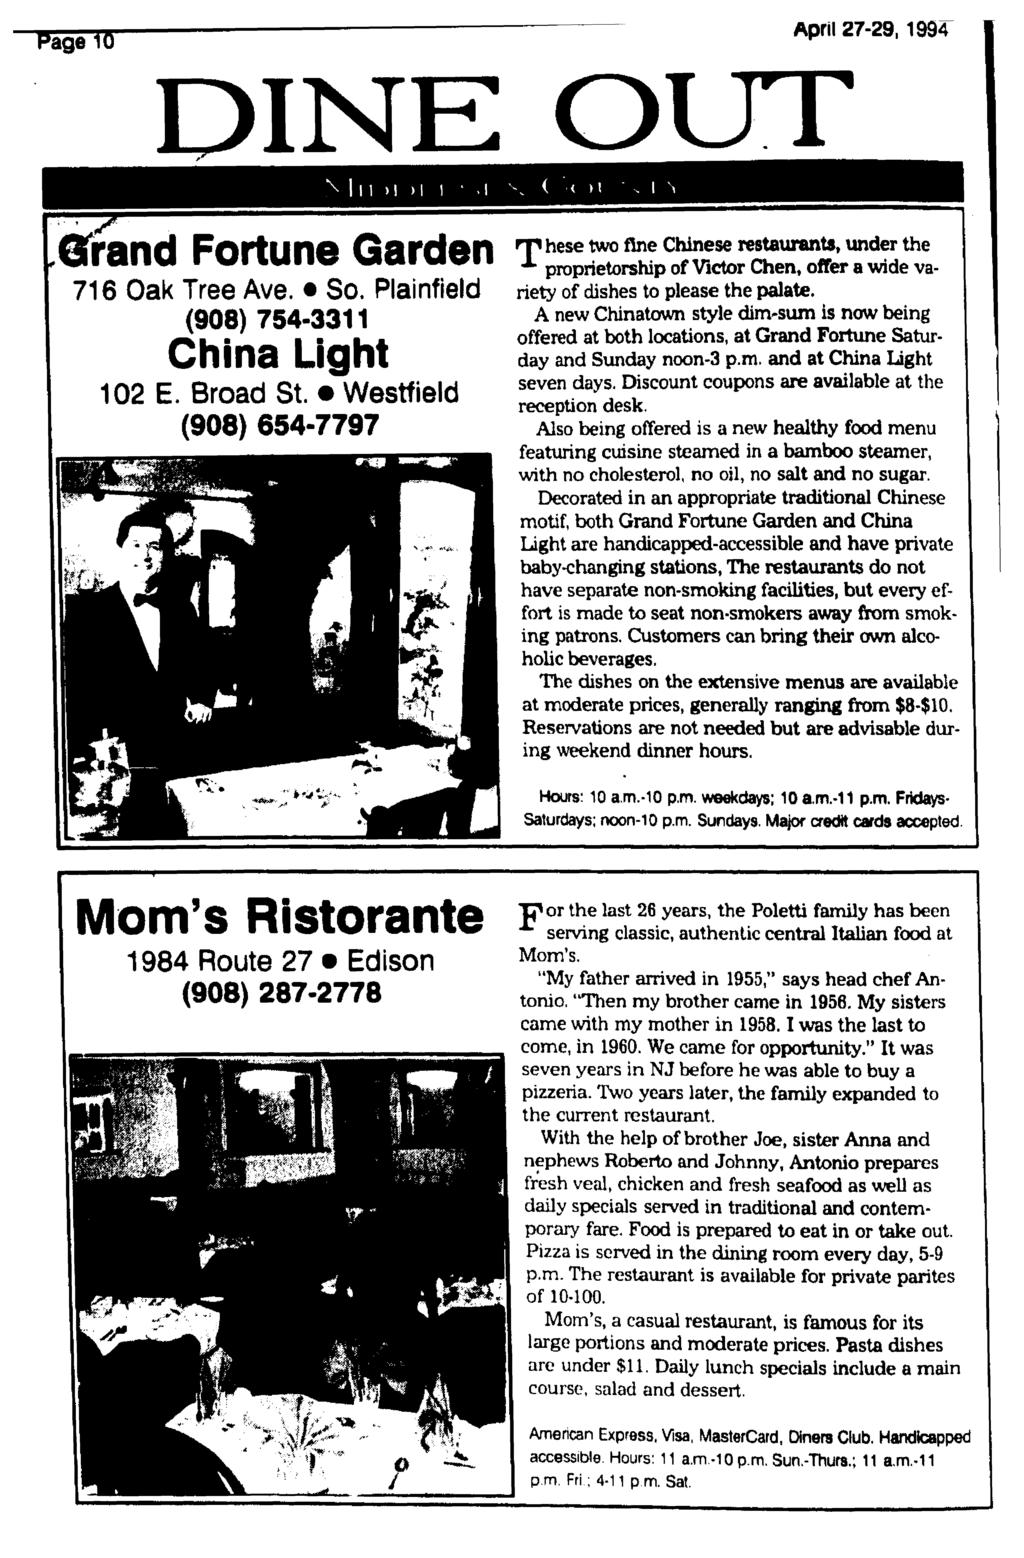 April 27-29,1994 DINE OUT Grand Fortune Garden 716 Oak Tree Ave. So. Plainfield (908) 754-3311 China Light 102 E. Broad St.